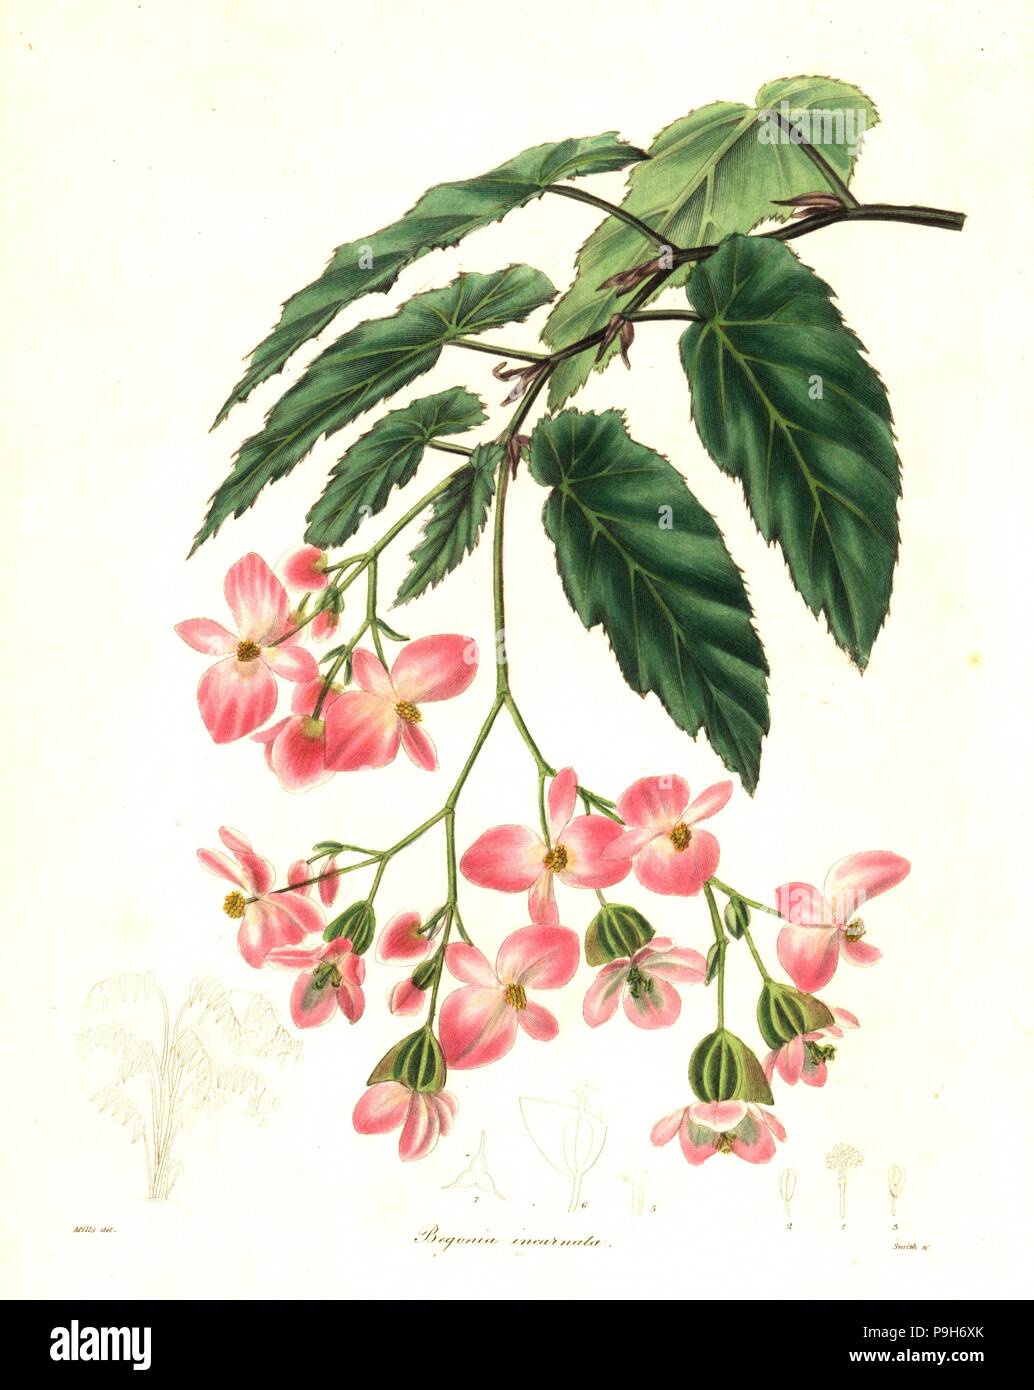 Rose-coloured begonia, Begonia incarnata. Handcoloured copperplate engraving by Smith after a botanical illustration by Mills from Benjamin Maund and the Rev. John Stevens Henslow's The Botanist, London, 1836. Stock Photo